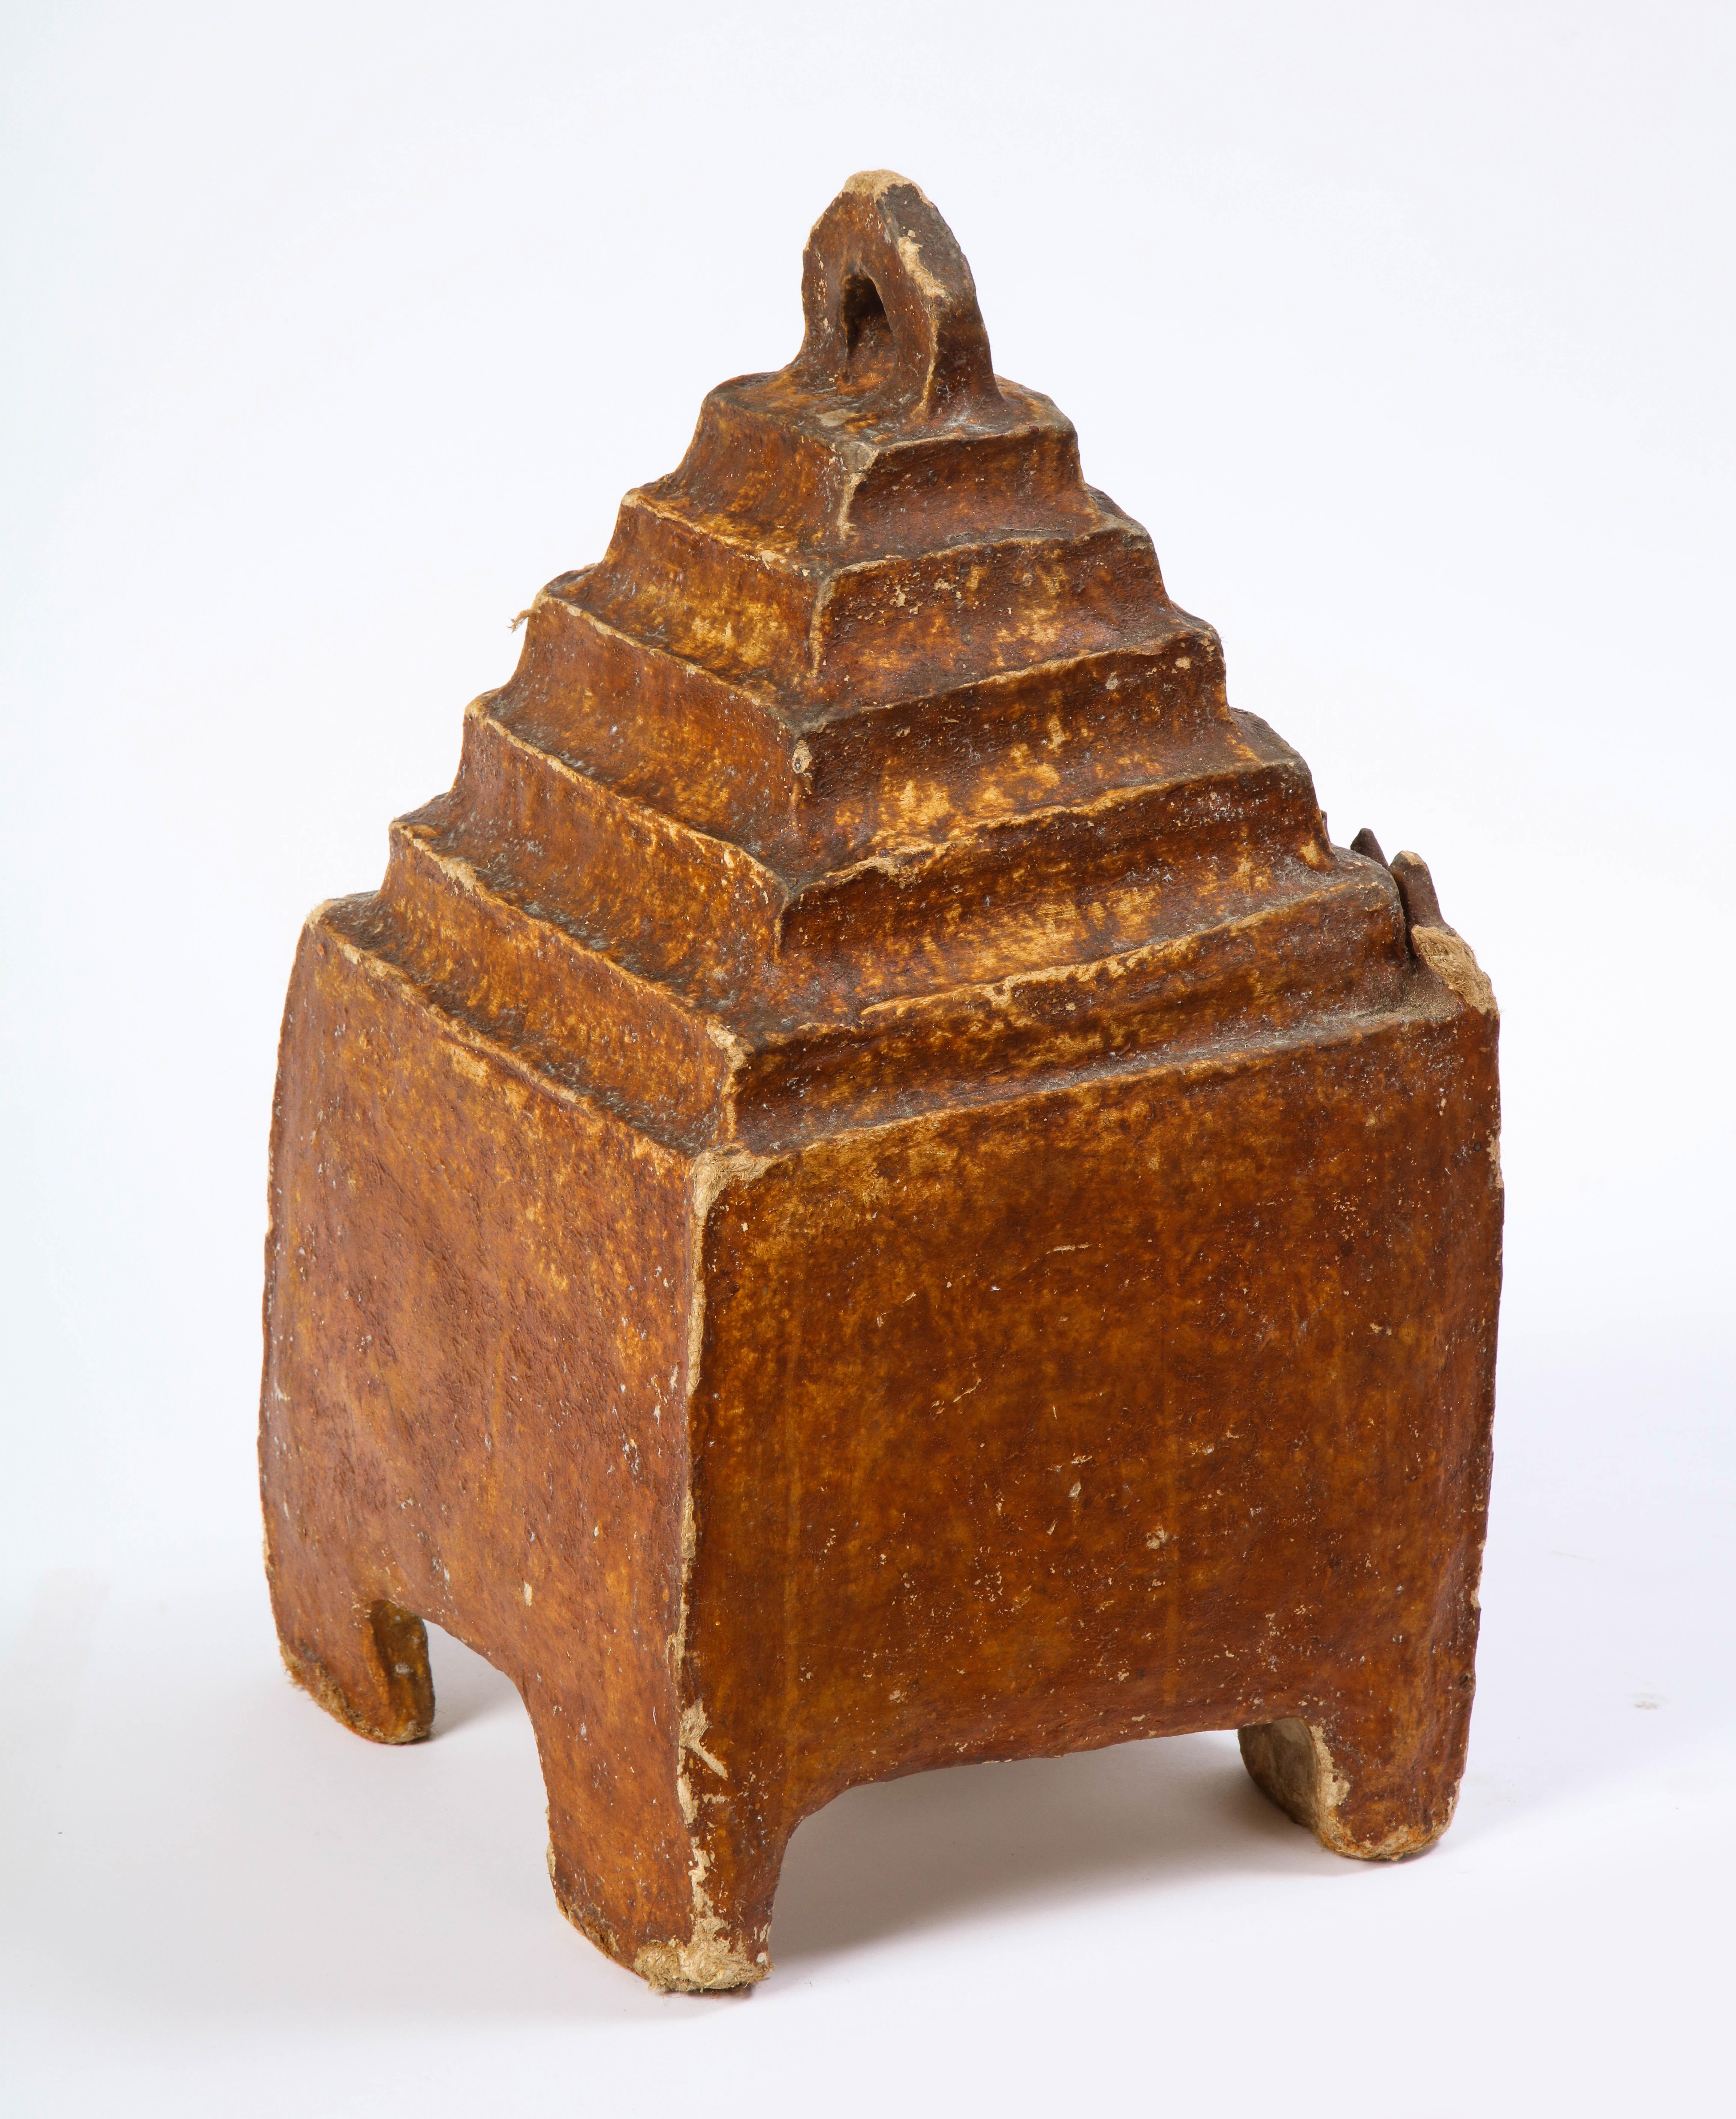 This charming Latin American composition birdhouse is painted a warm bronze color with painted decoration and mirrored inset throughout. The birdhouse is of stepped pyramid-form with a hanging finial and sits on four legs. The small opening is a